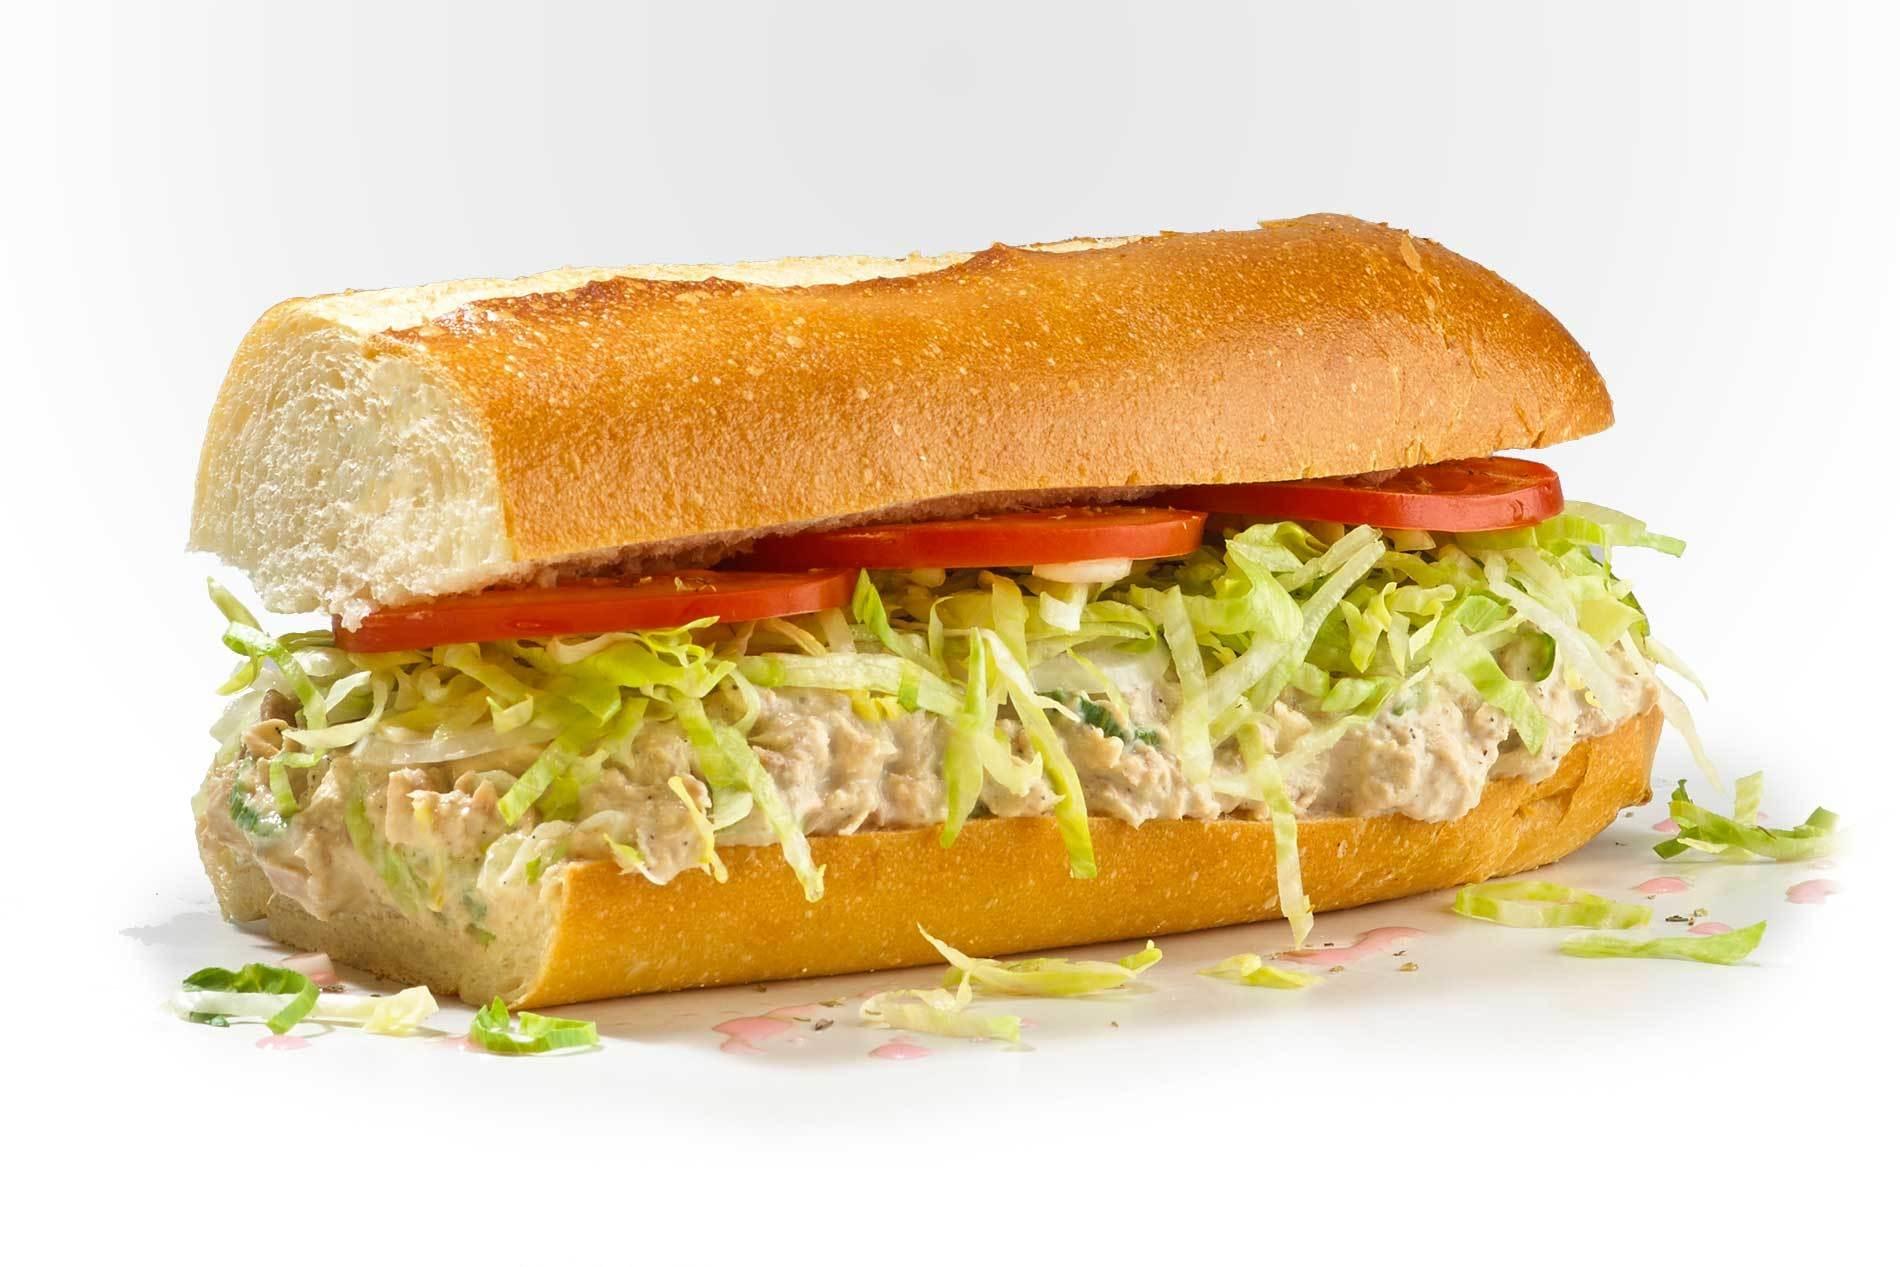 Jersey Mike's Giant Tuna Fish Nutrition Facts